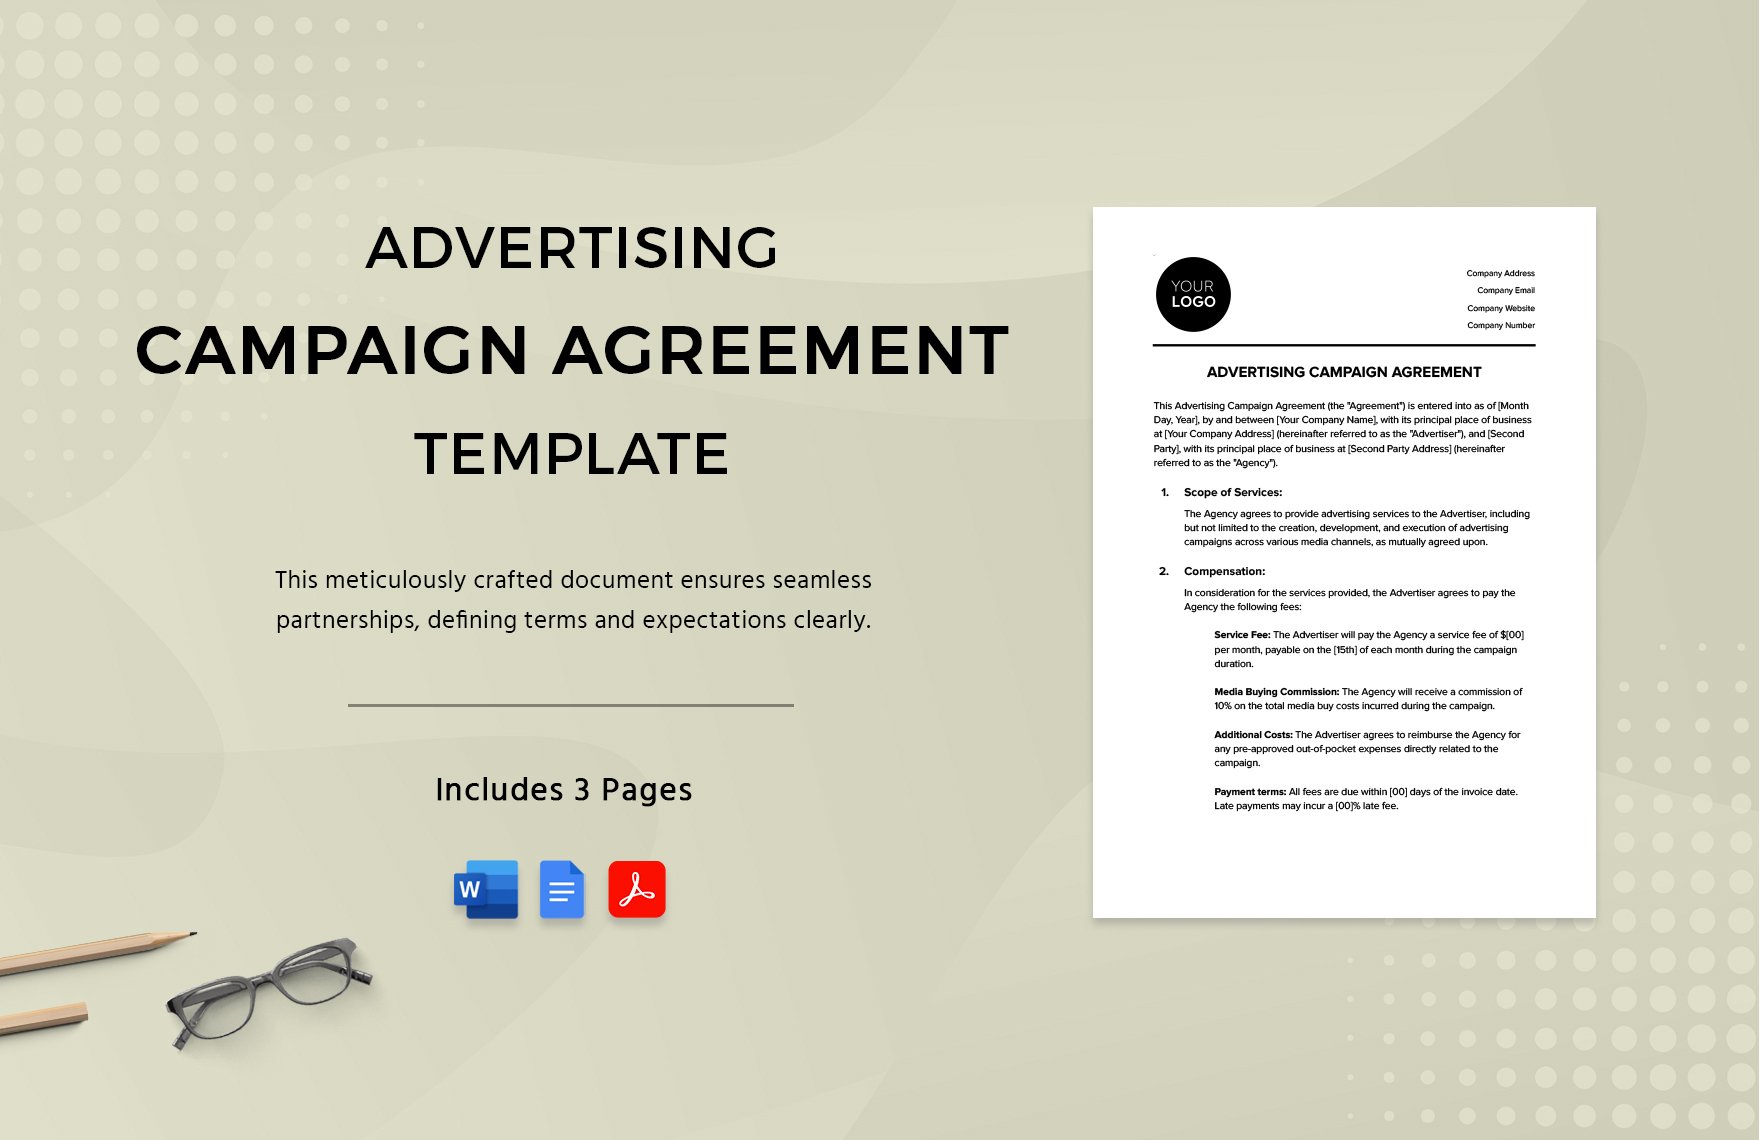 Advertising Campaign Agreement Template in Word, Google Docs, PDF